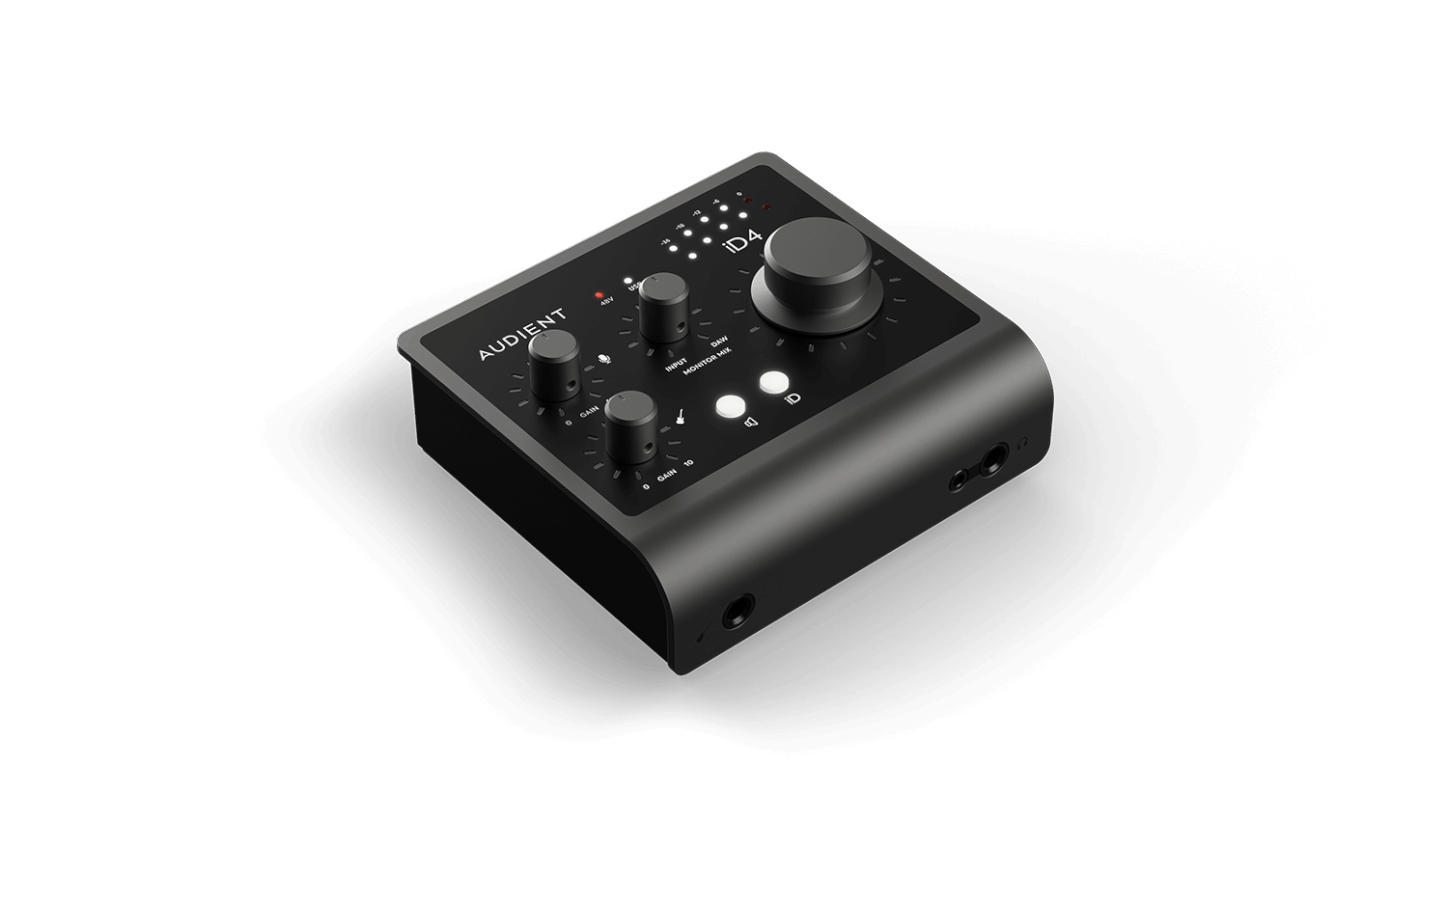 iD4 - 2in / 2out Audio Interface - Your recordings made better